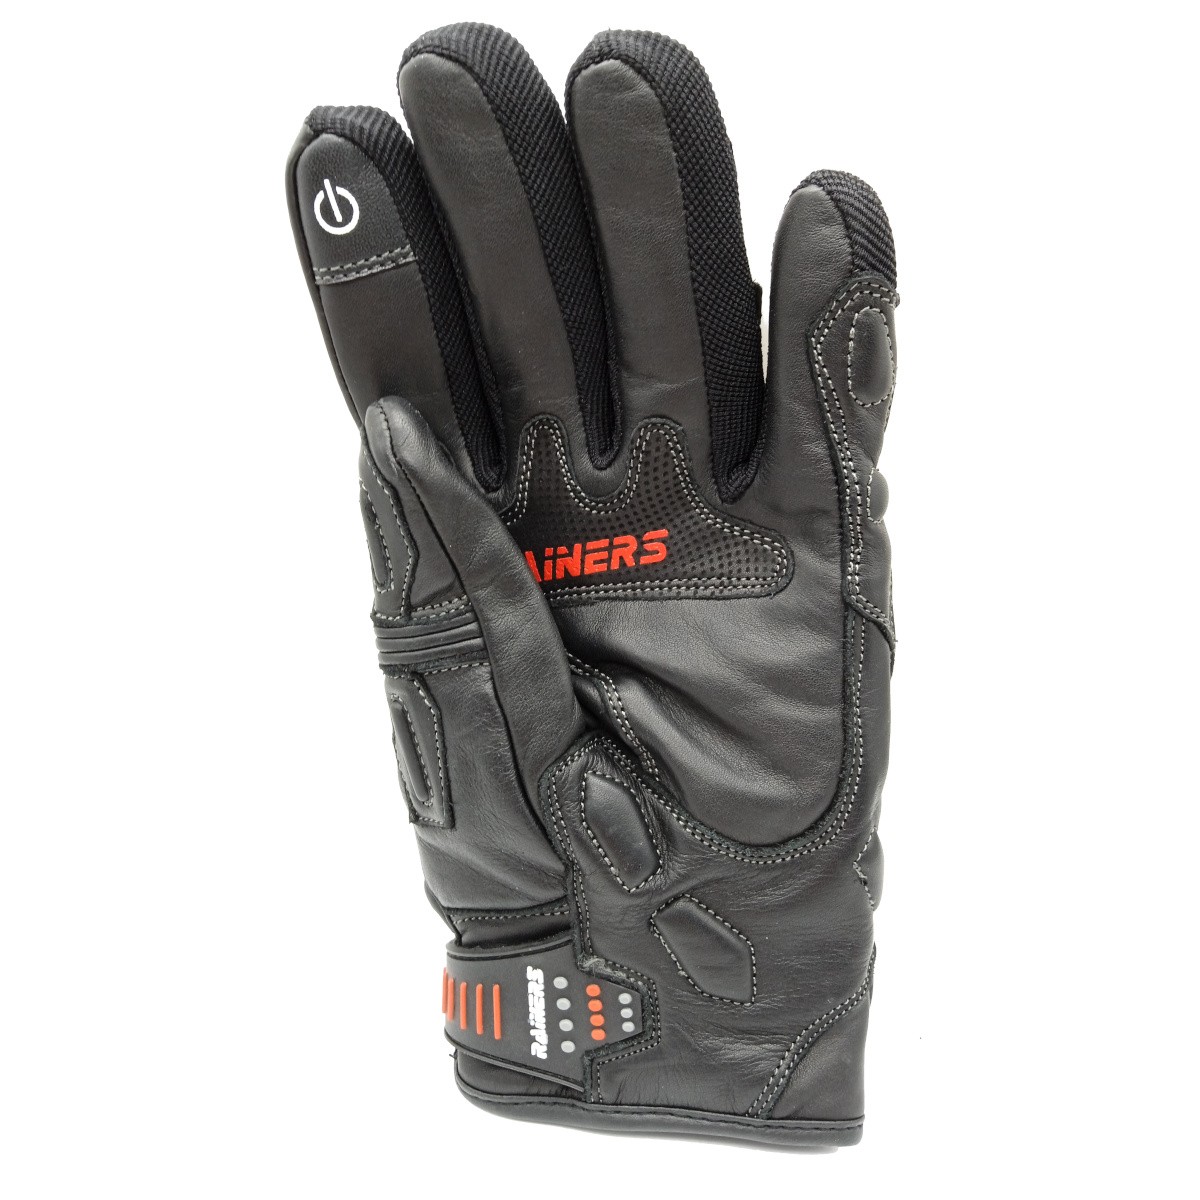 Guantes RAINERS ROAD-WN RACING NEGROS INVIERNO 1